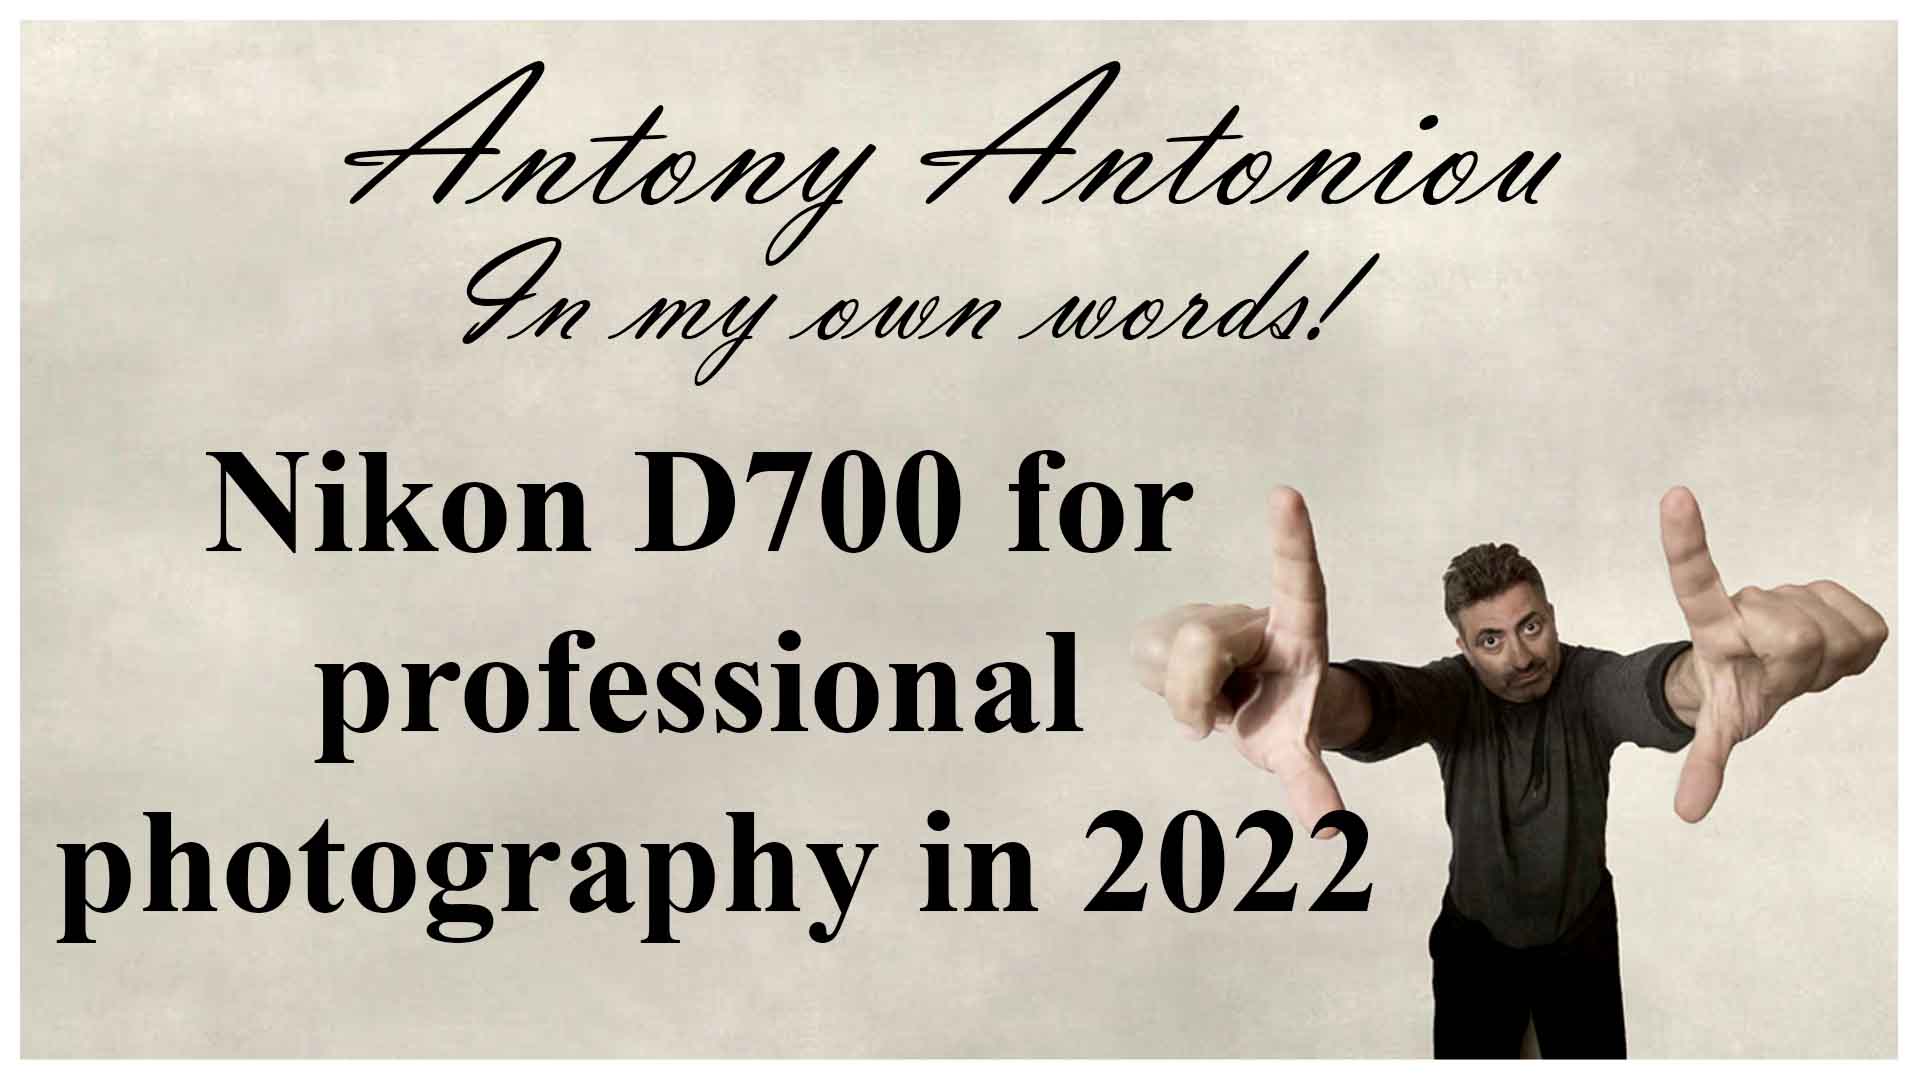 Nikon D700 for professional photography in 2022